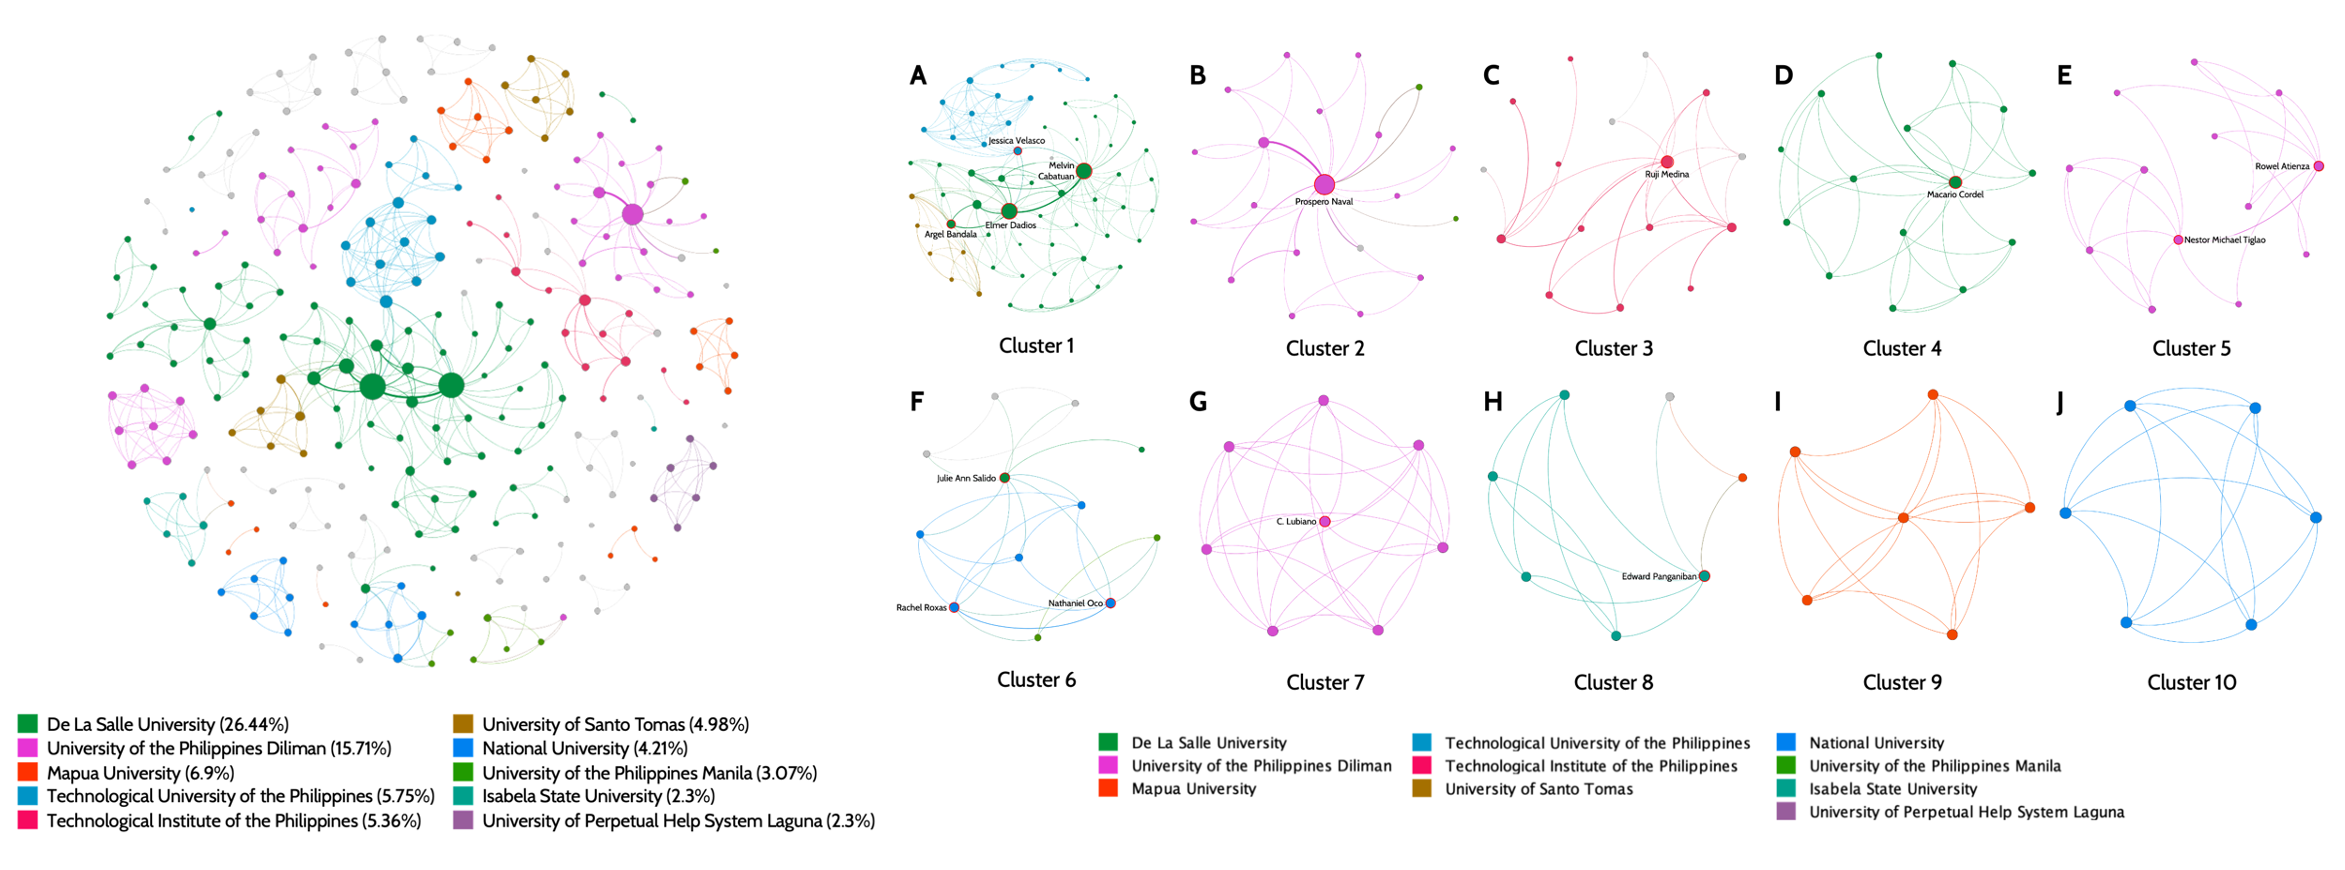 On the left is the co-authorship network of Filipino researchers working on deep learning. On the right is the top ten clusters of researchers based on size.